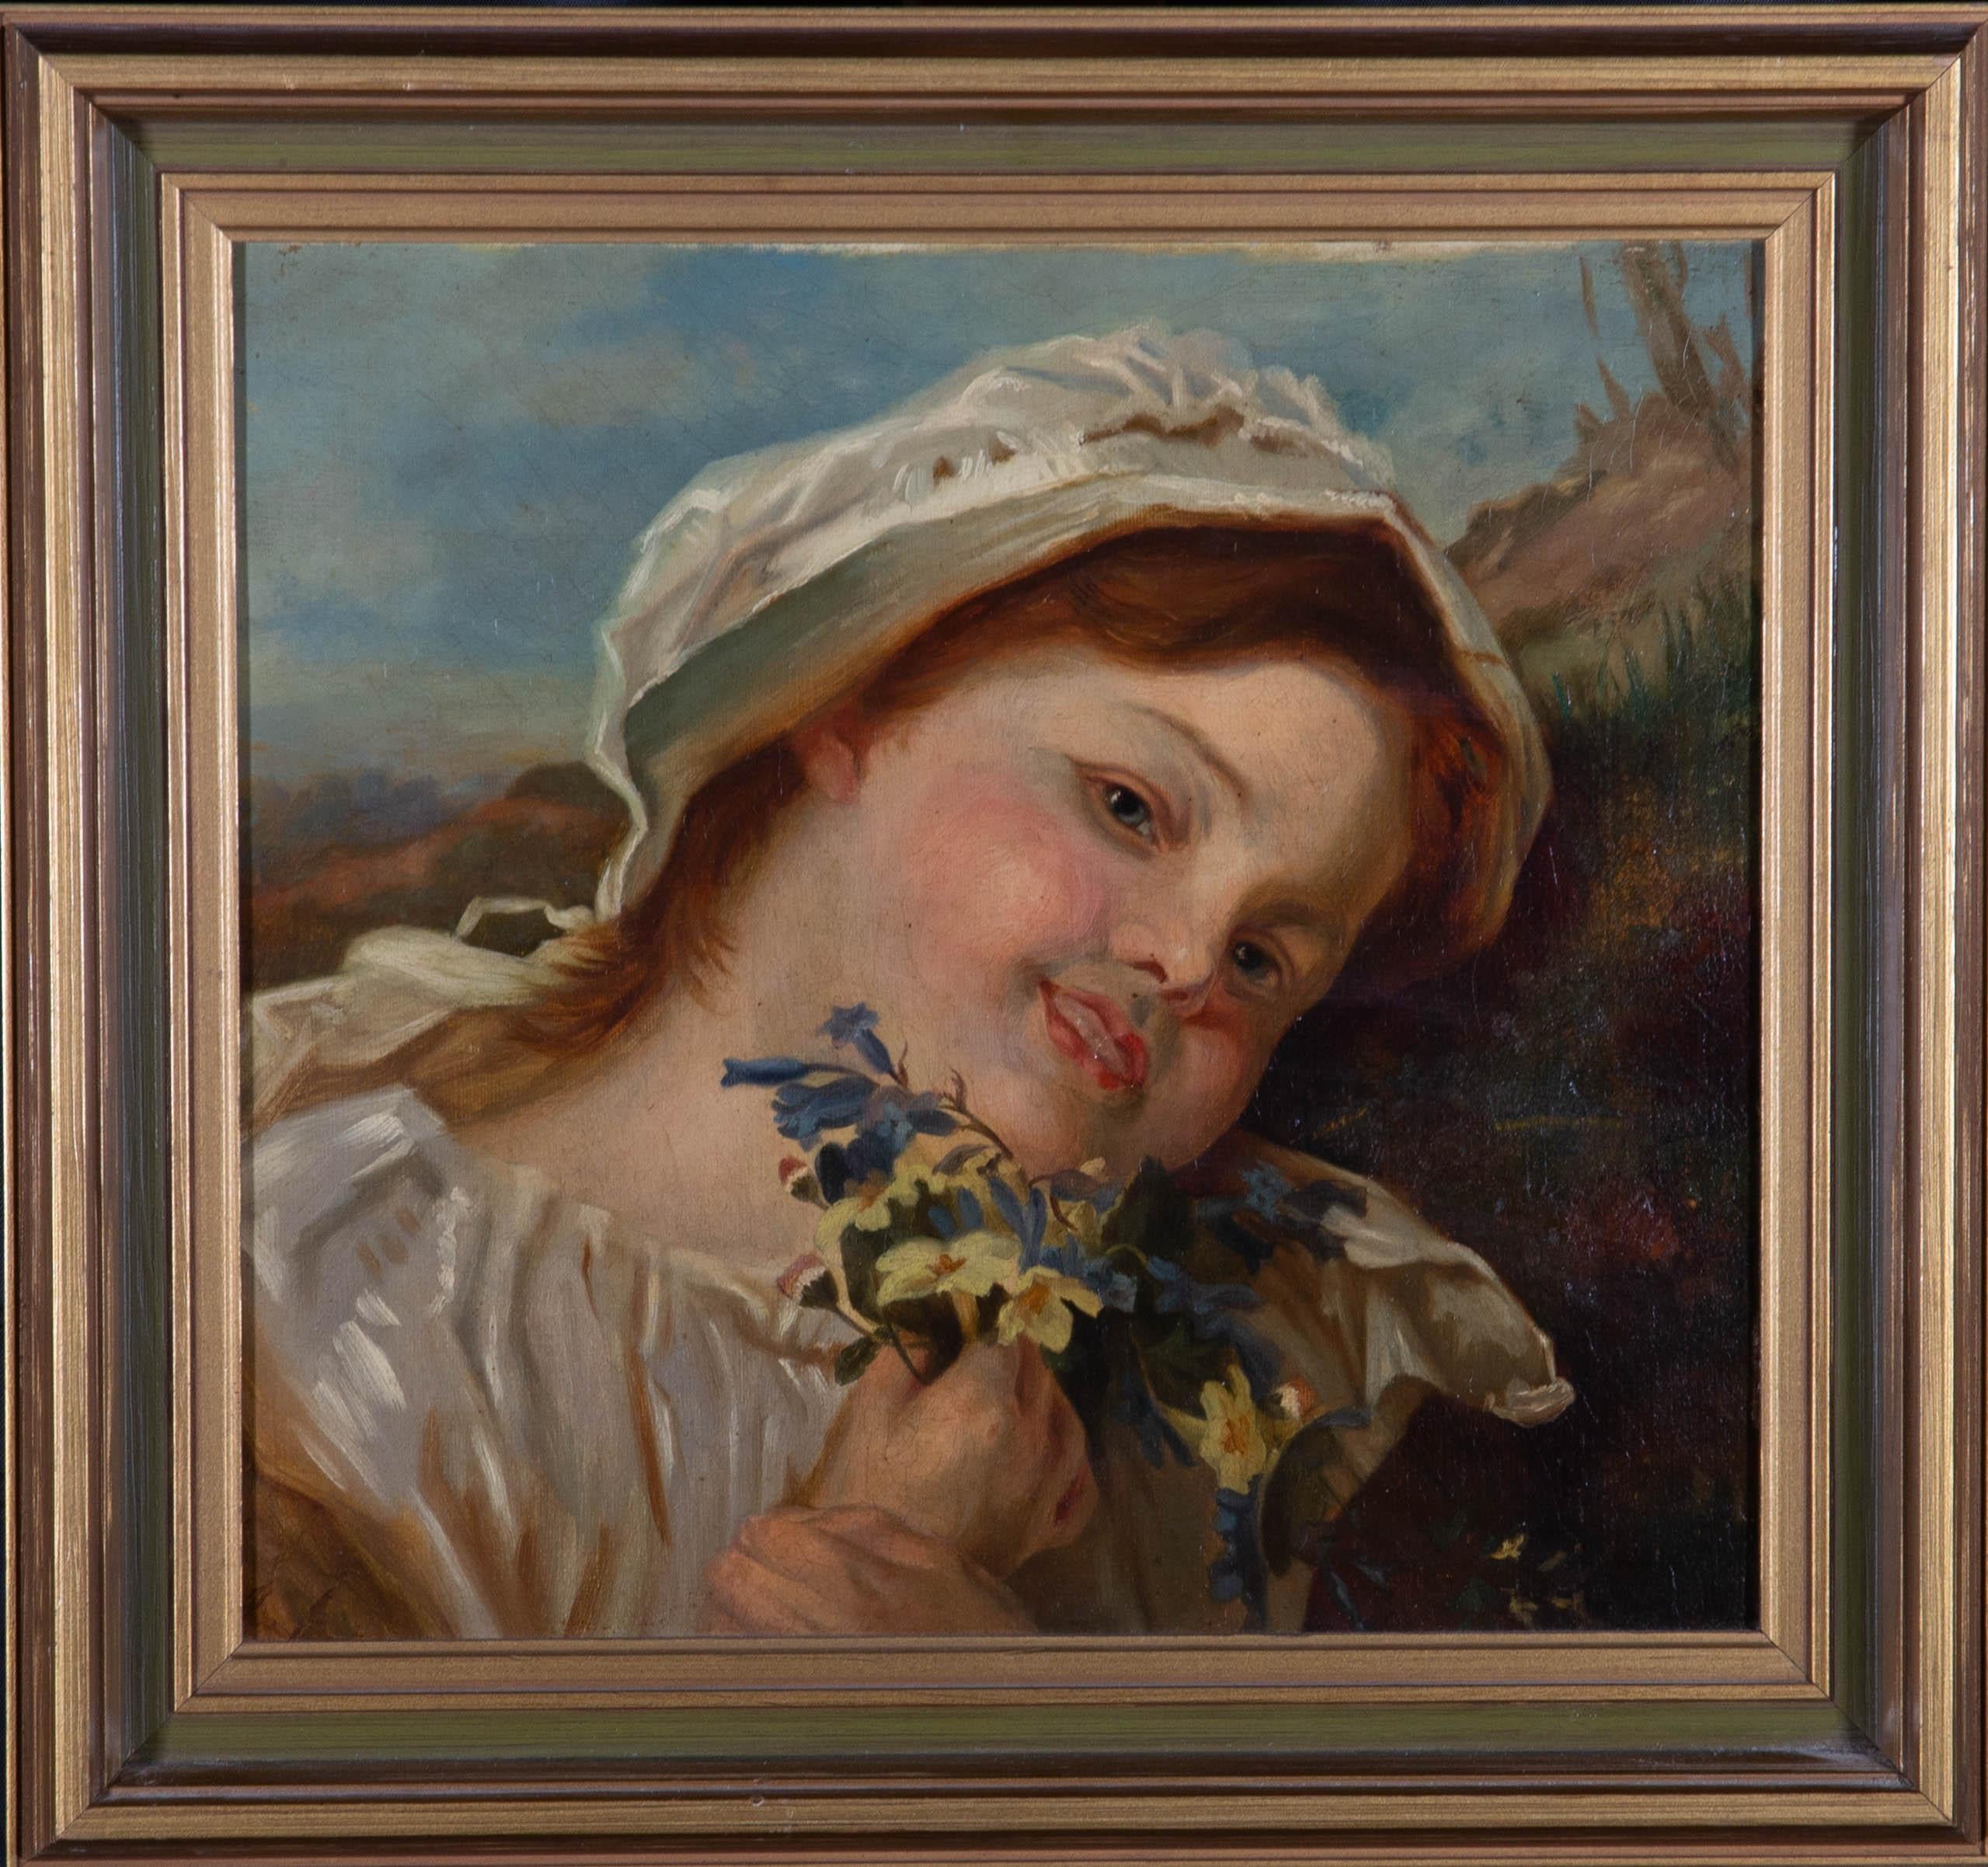 Unknown Portrait Painting - Late 19th Century Oil - Innocence In Summer